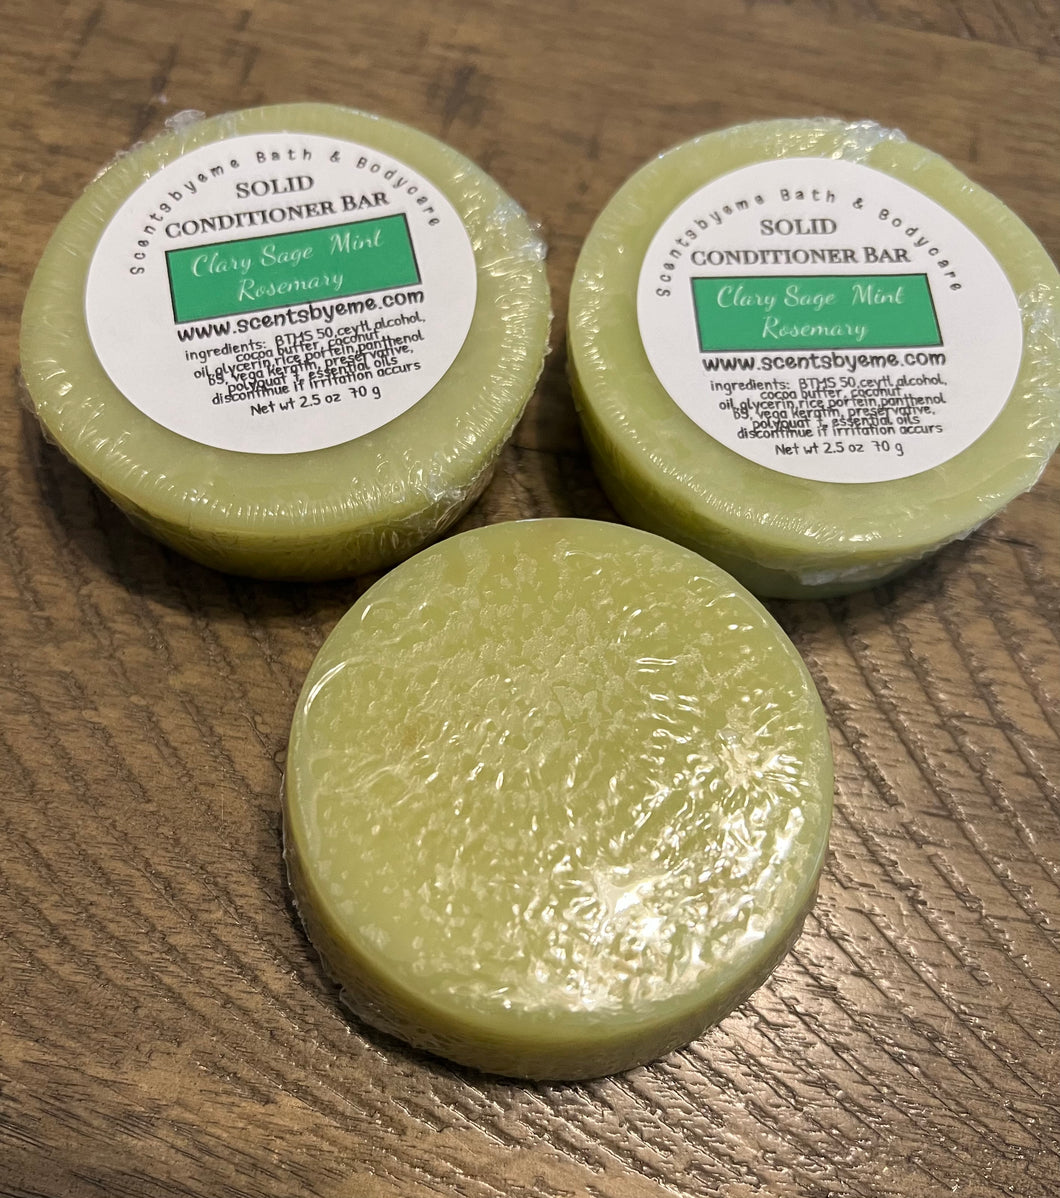 Solid Conditioner Bar -  Clary Sage Mint Rosemary